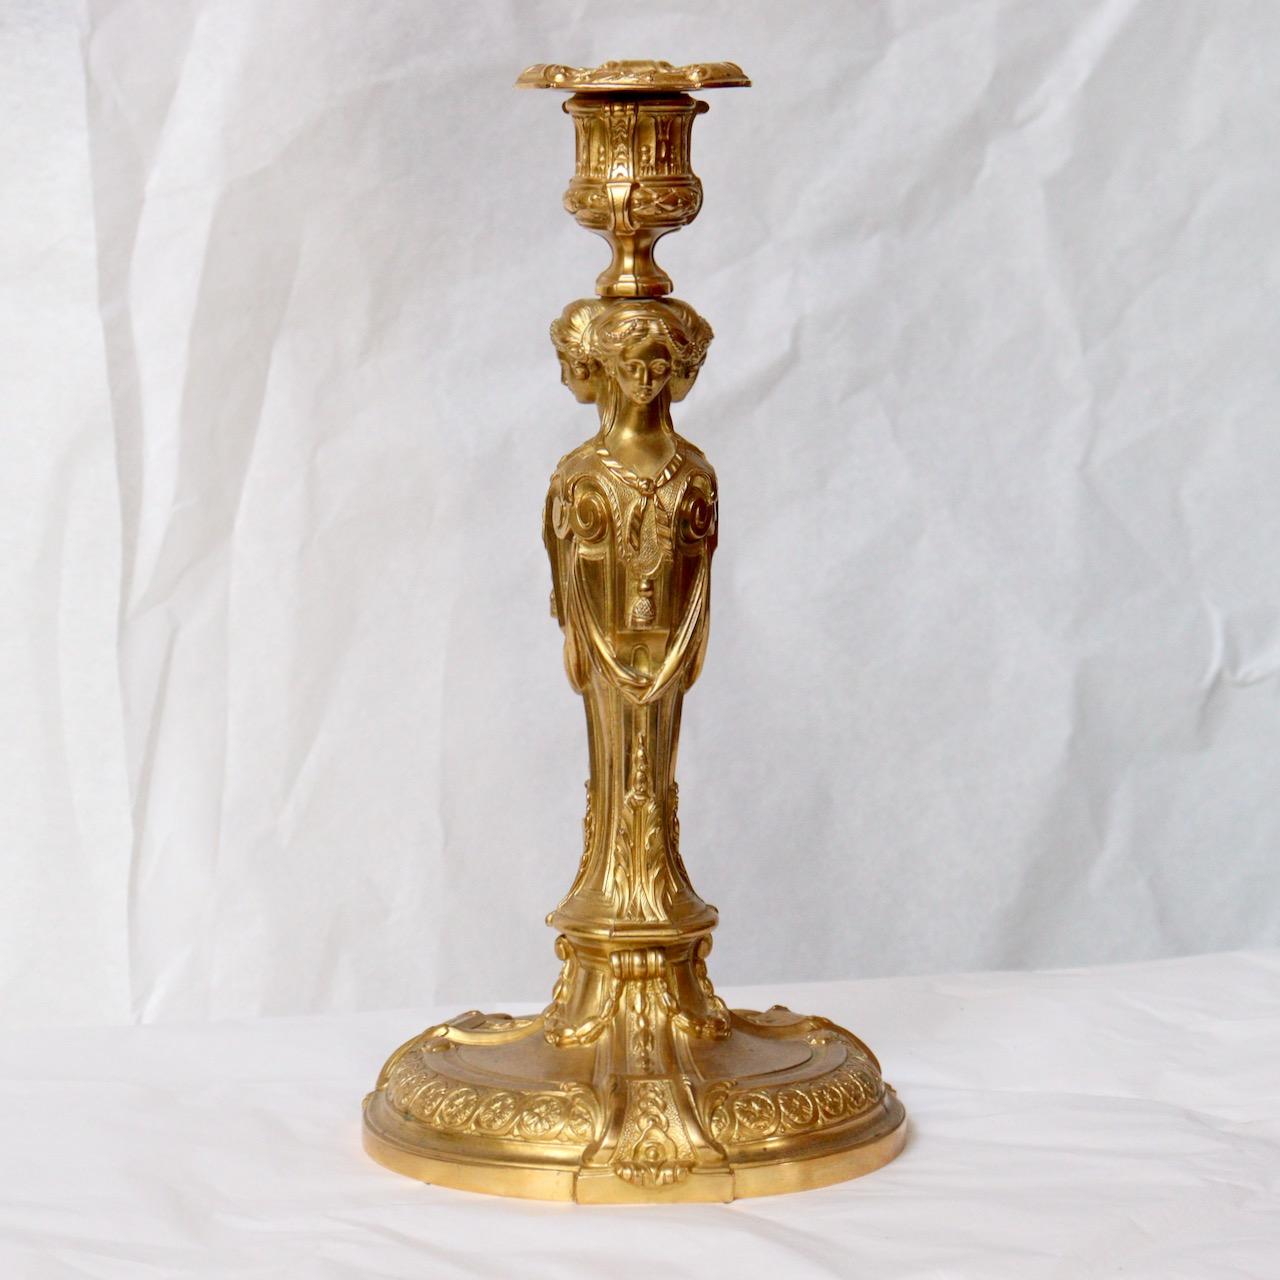 A Pair of Second Half 19th Century French Ormolu Louis XVI Style Candlesticks  1